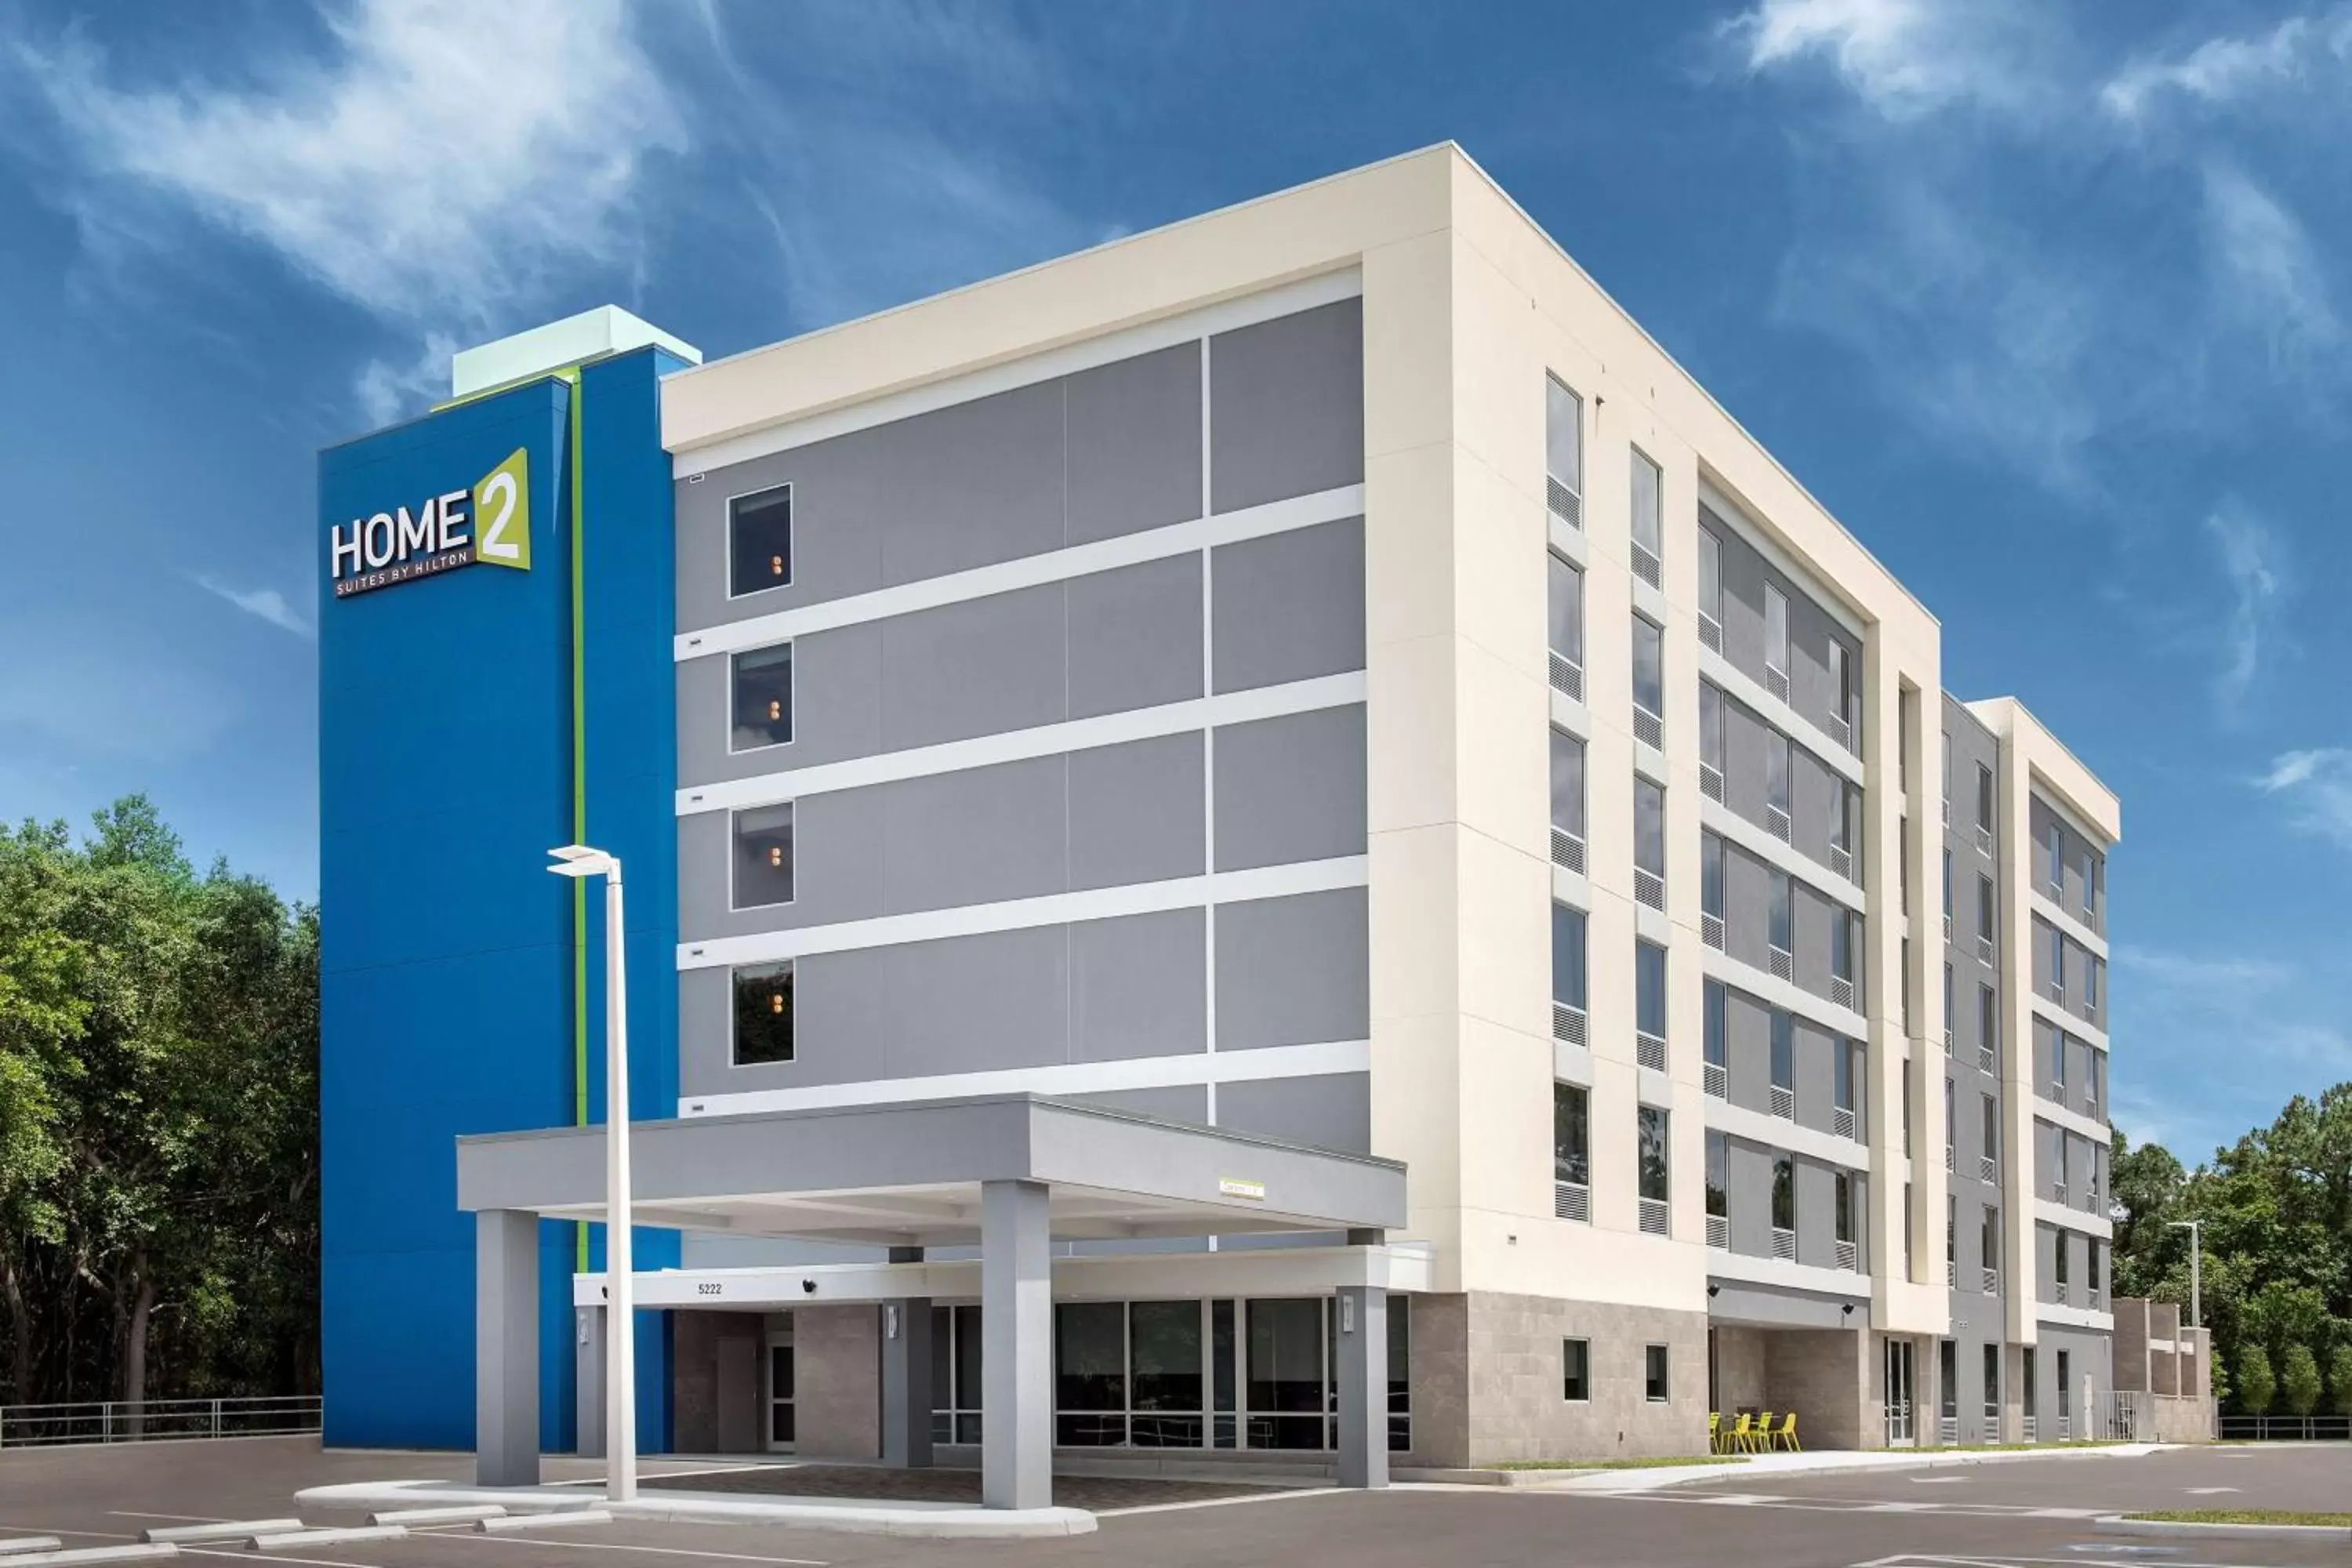 Property Building in Home2 Suites By Hilton Tampa Westshore Airport, Fl